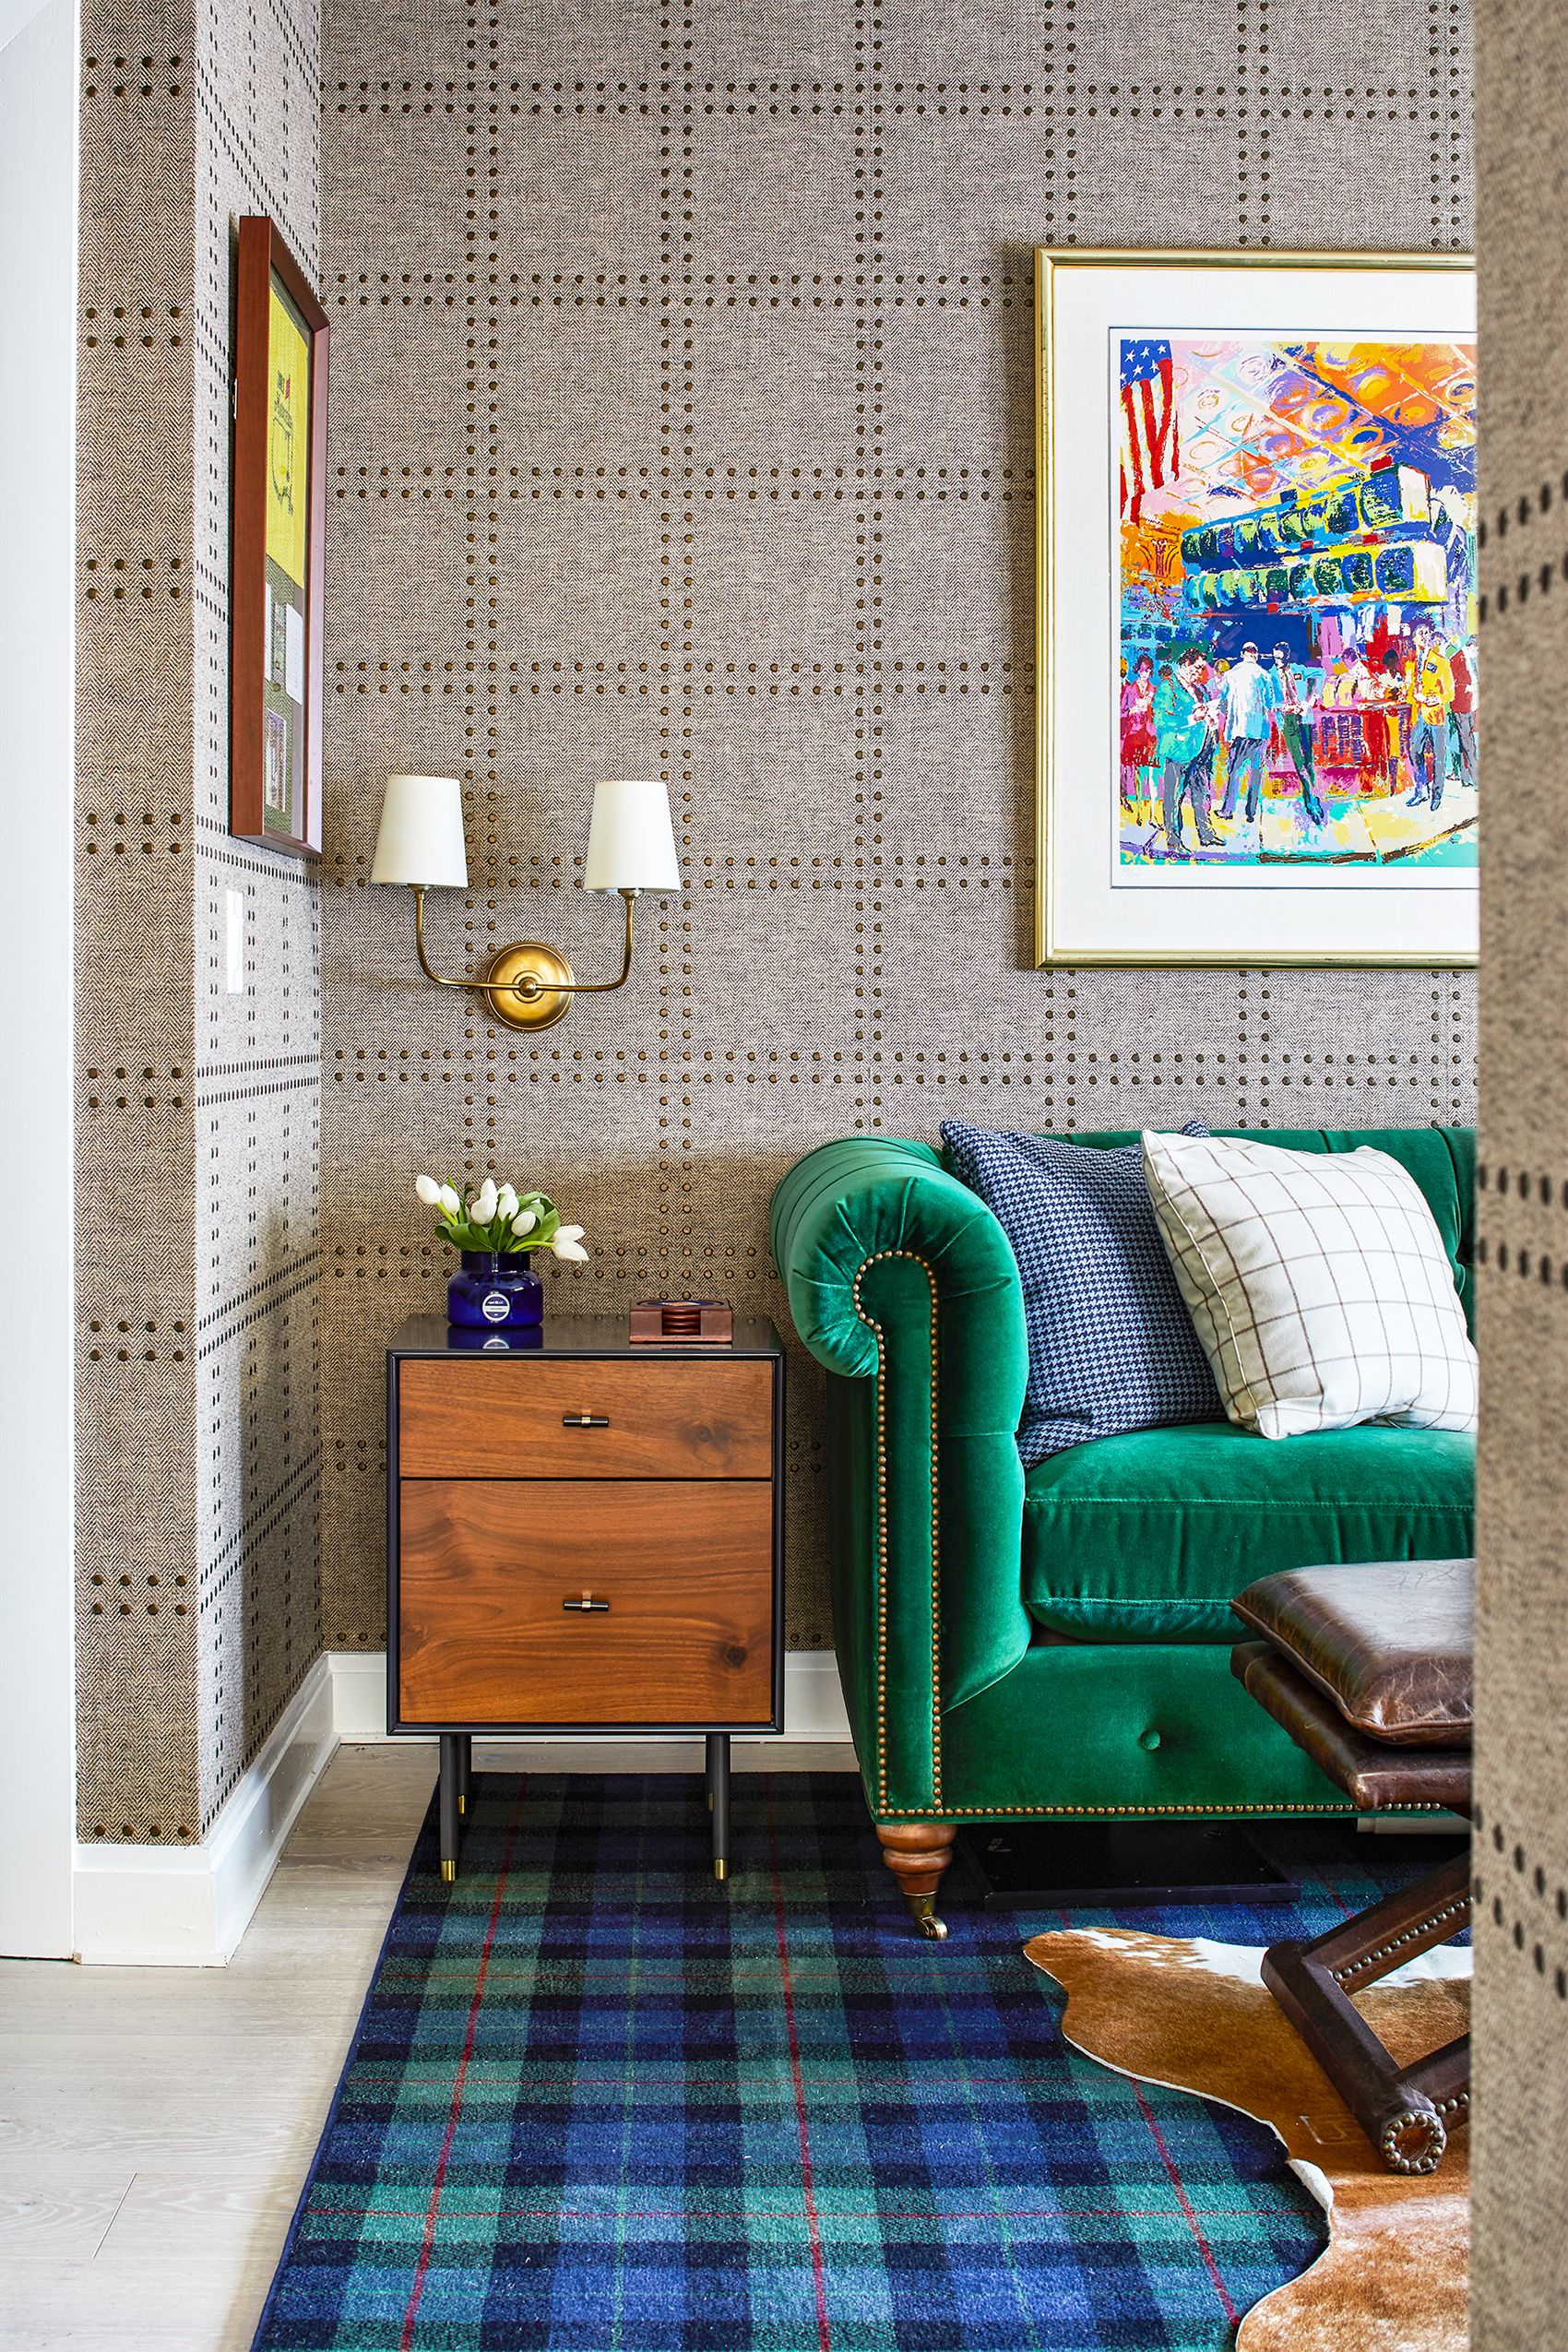 45 Innovative Textured Wall Ideas for Every Aesthetic